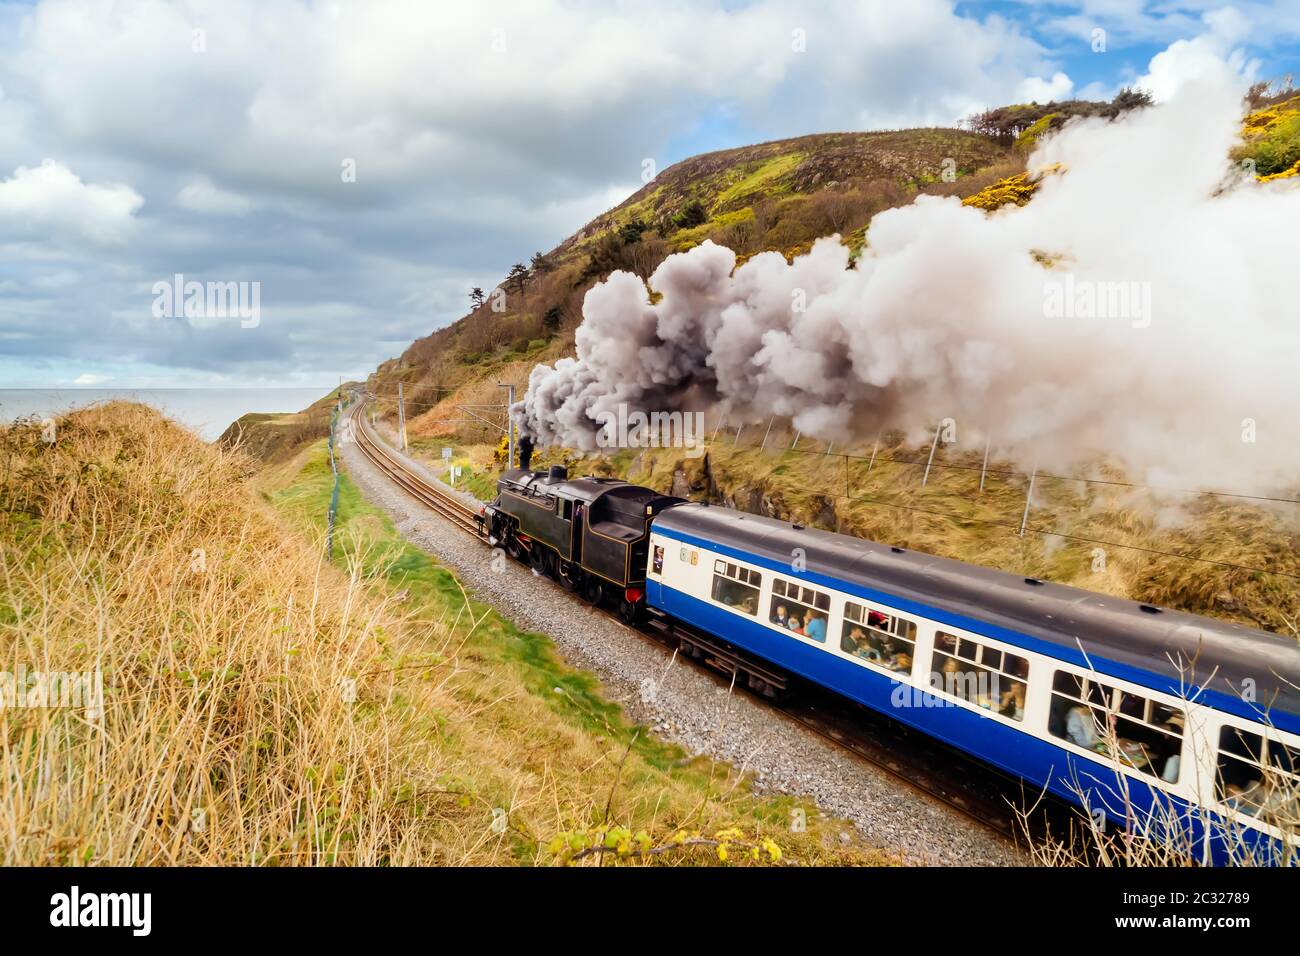 Steam train with passenger carriages on coastal railway Stock Photo